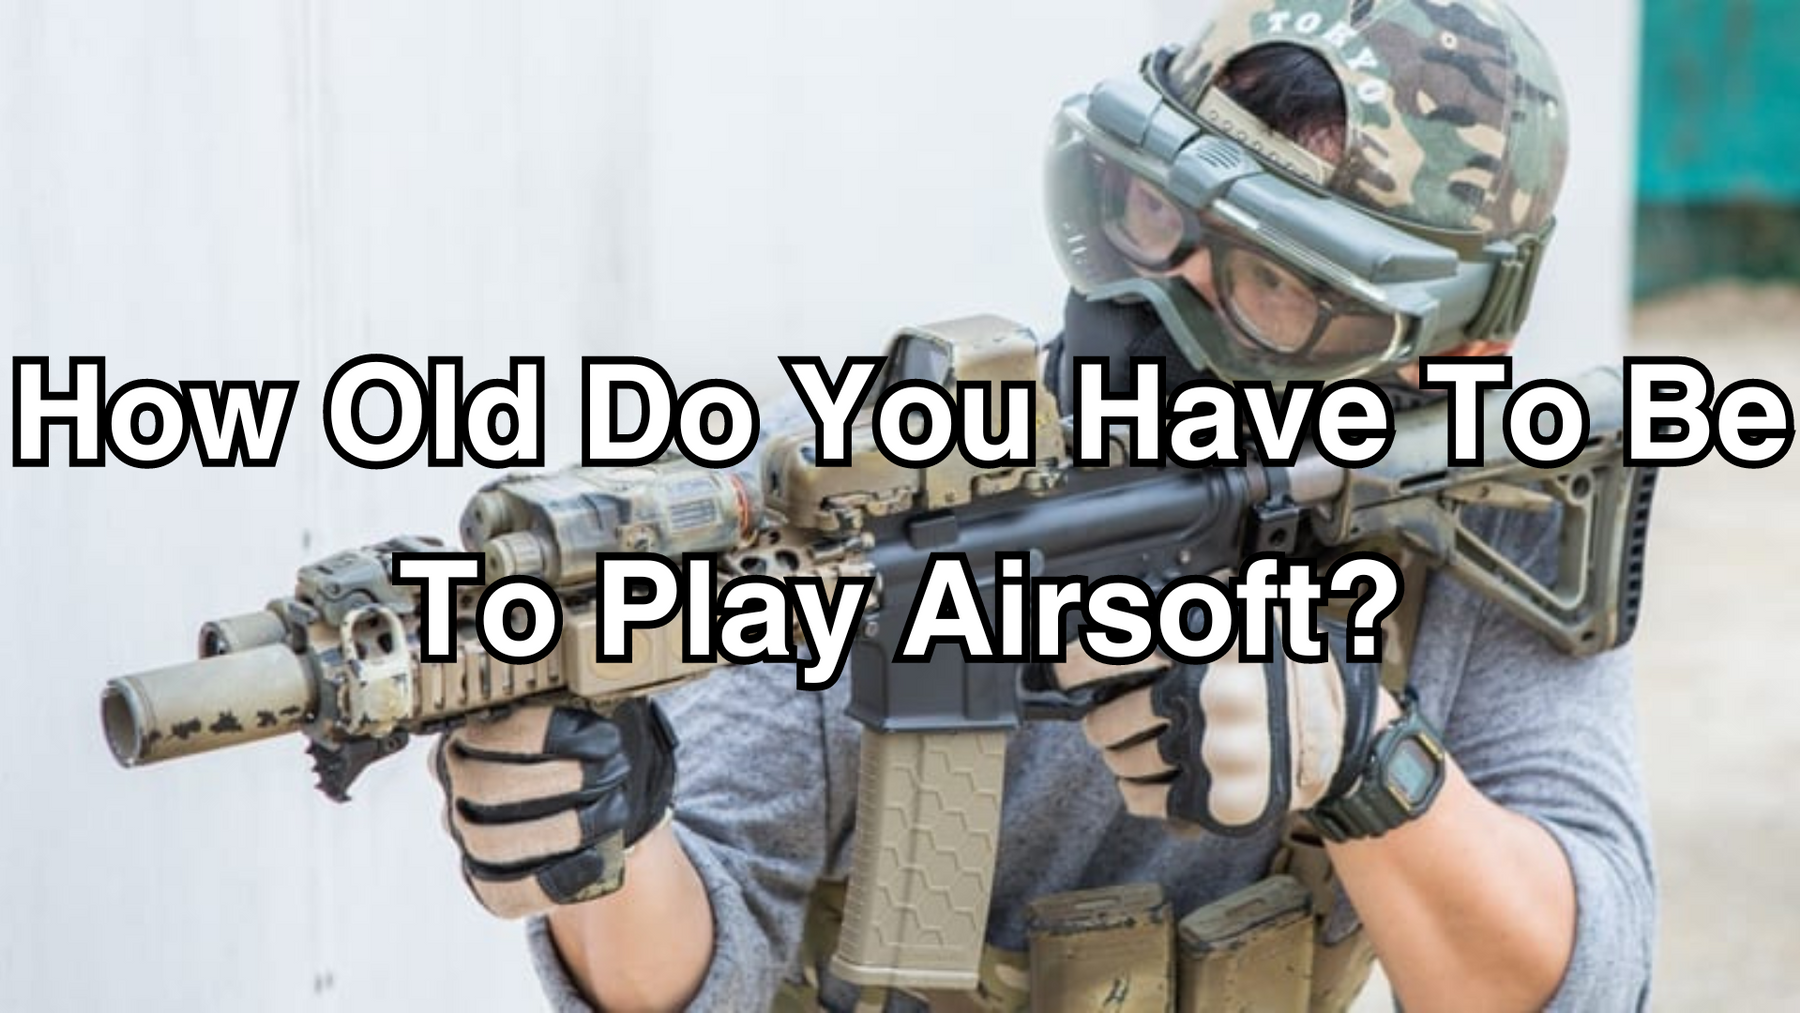 How Old do You Have to be to Play Airsoft?